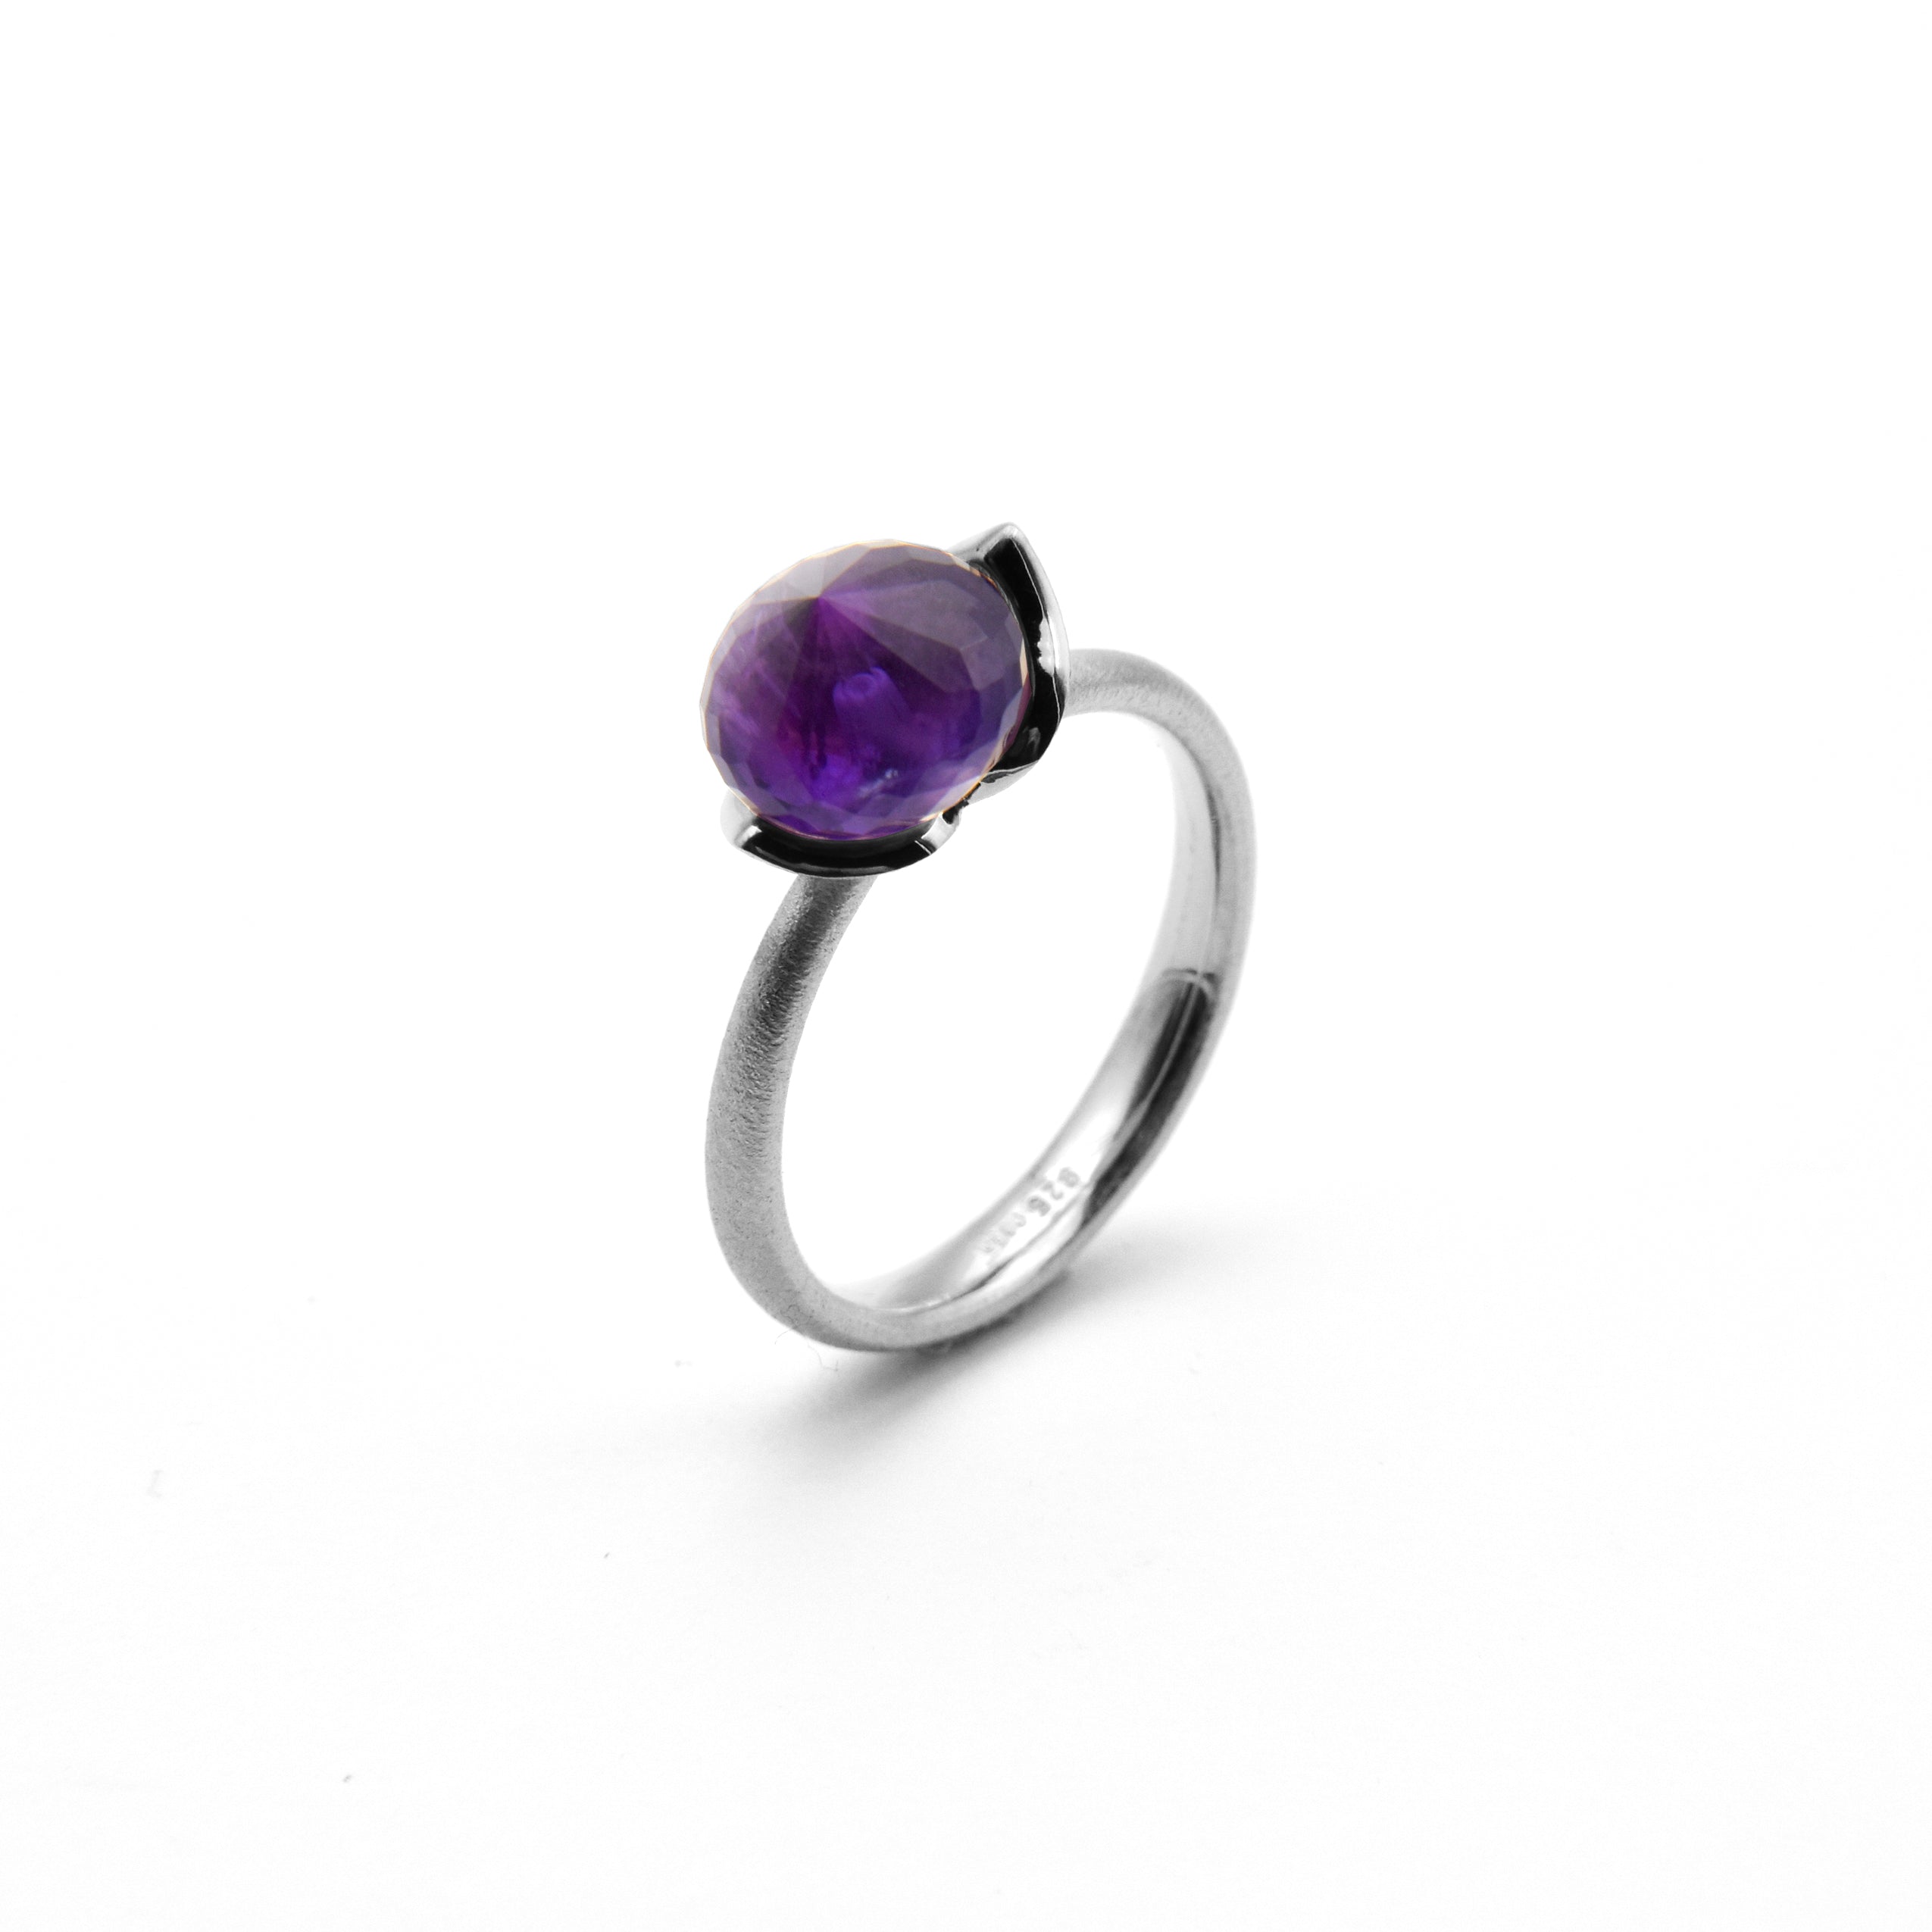 Dolce ring "smal" with amethyst 925/-